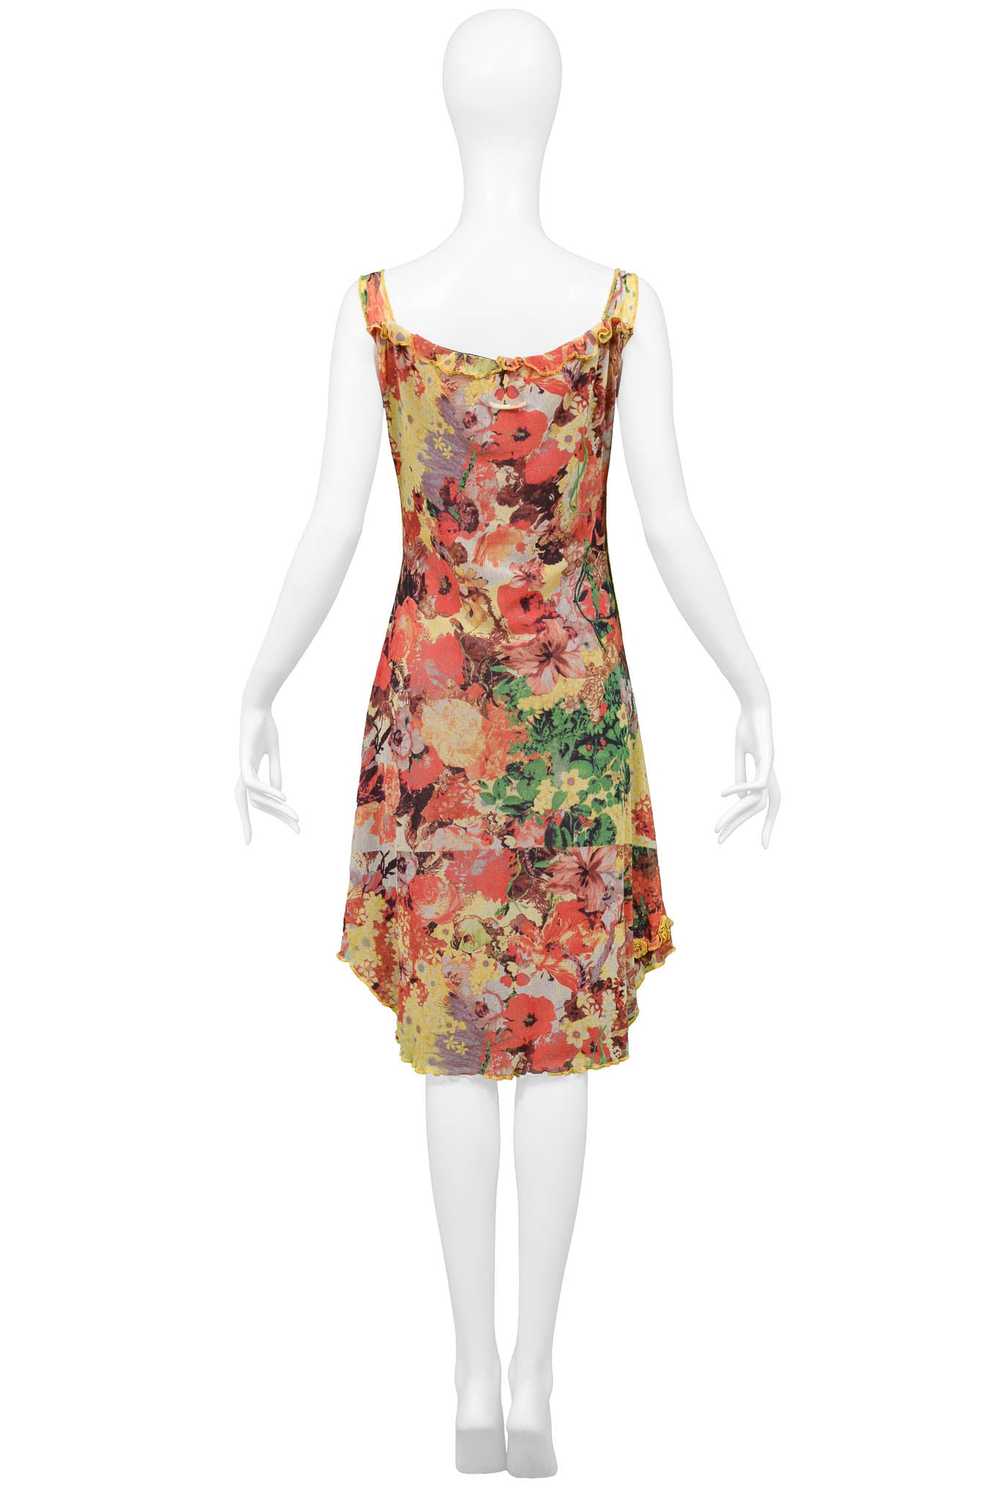 JEAN PAUL GAULTIER FLORAL PRINT MESH DRESS WITH P… - image 4